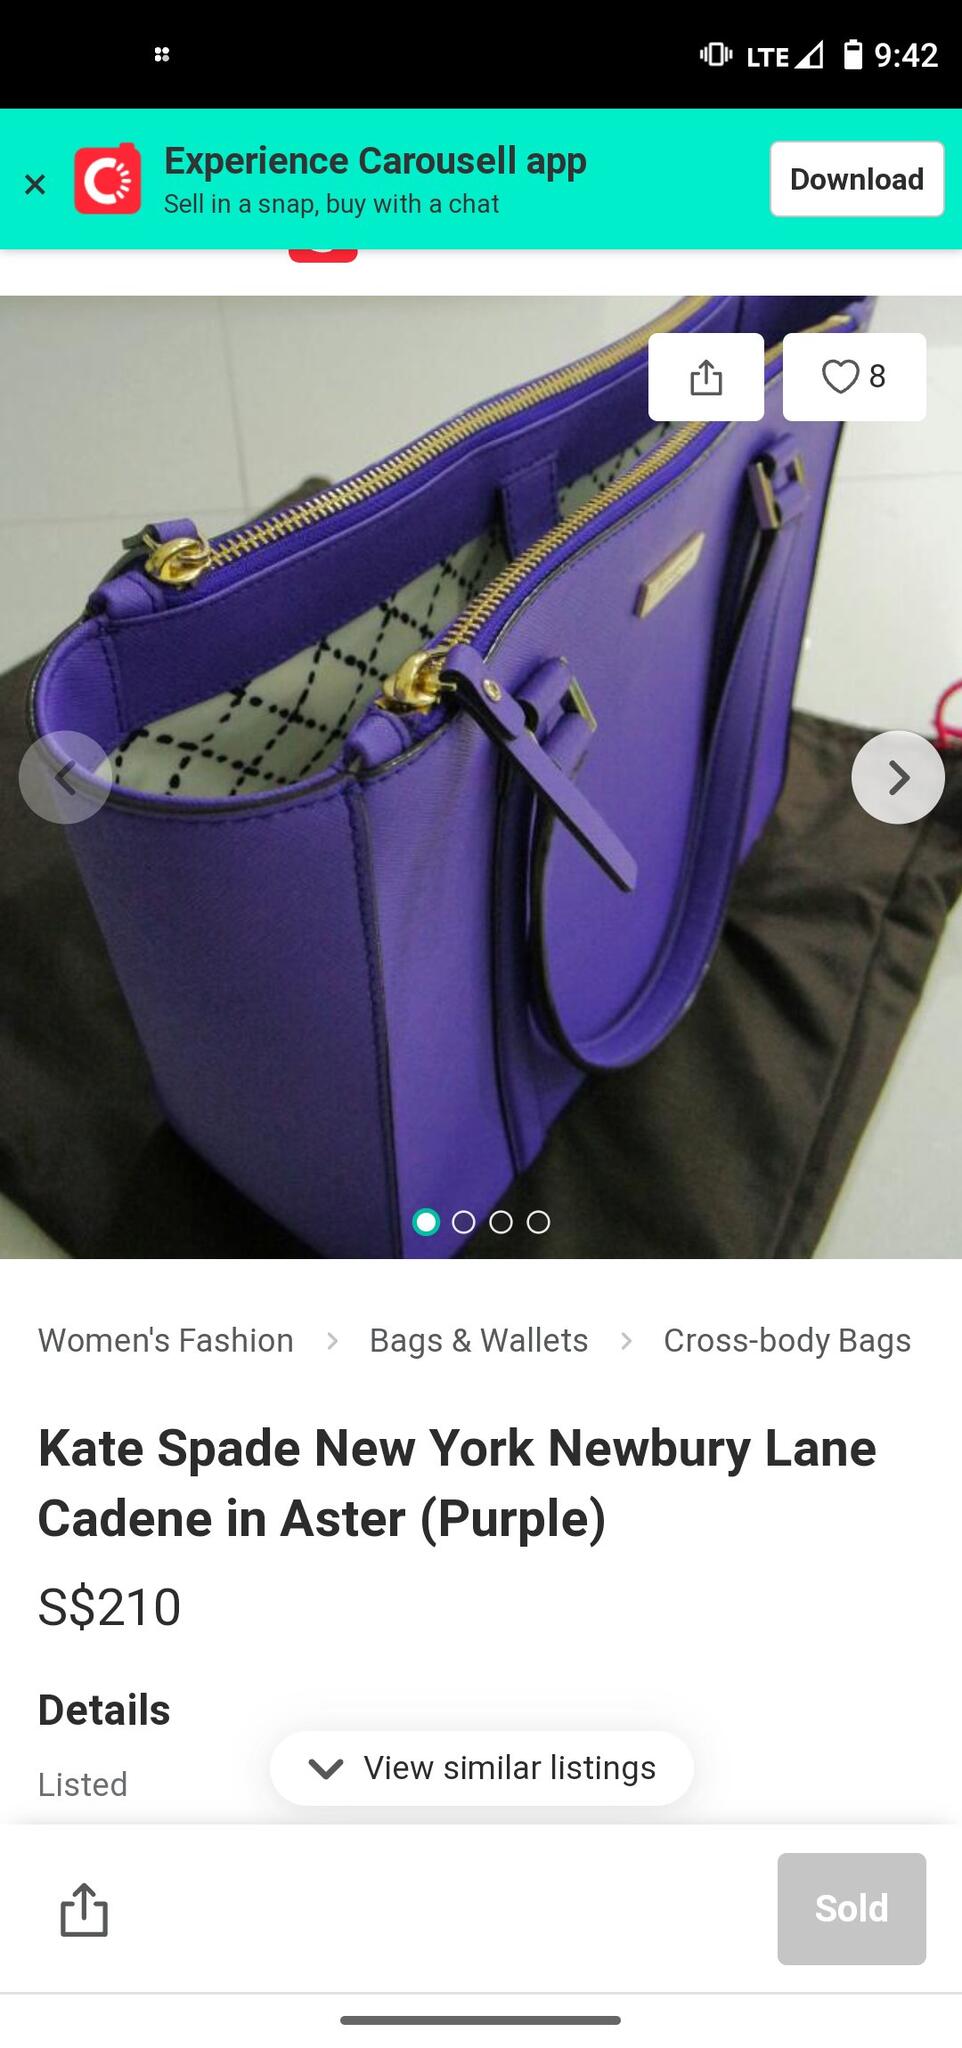 Kate Spade Purse for $70 in Conyers, GA | For Sale & Free — Nextdoor